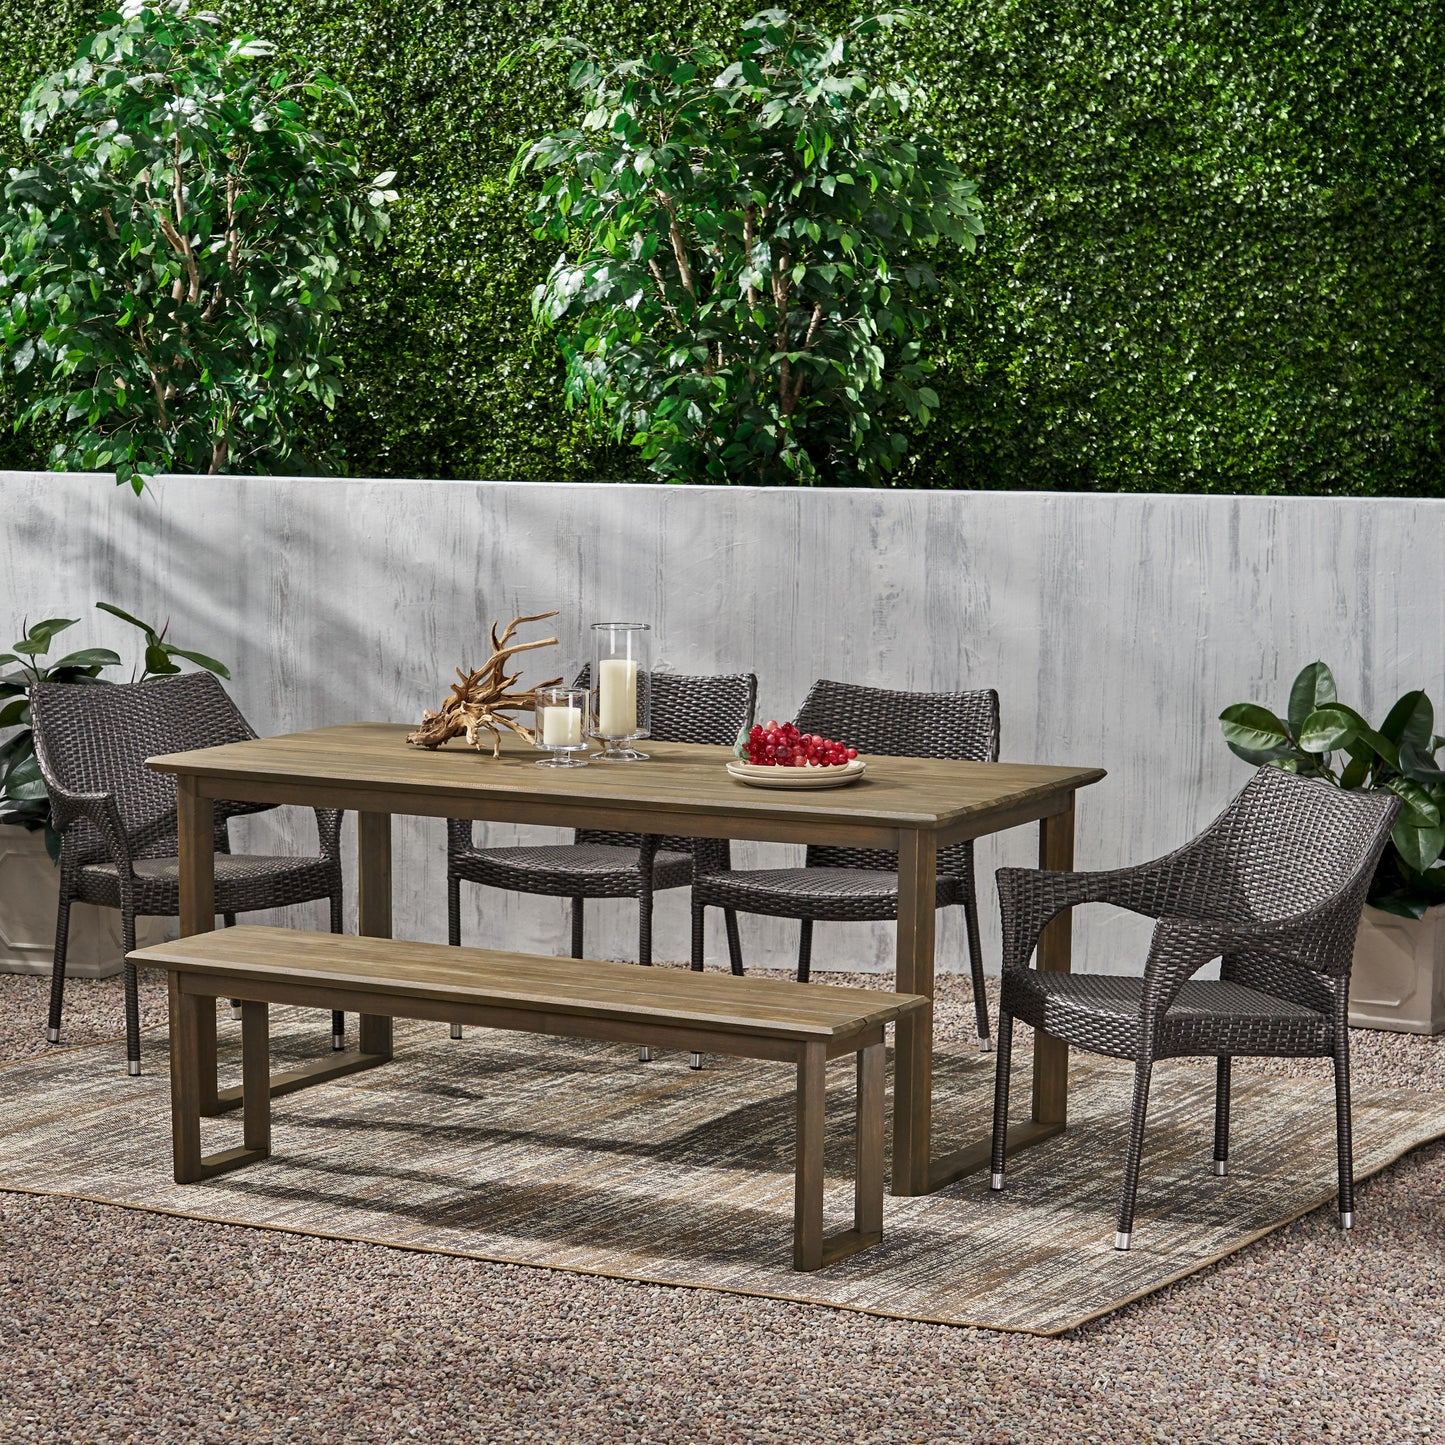 Ellendale Outdoor Acacia Wood and Wicker 6 Piece Dining Set with Bench